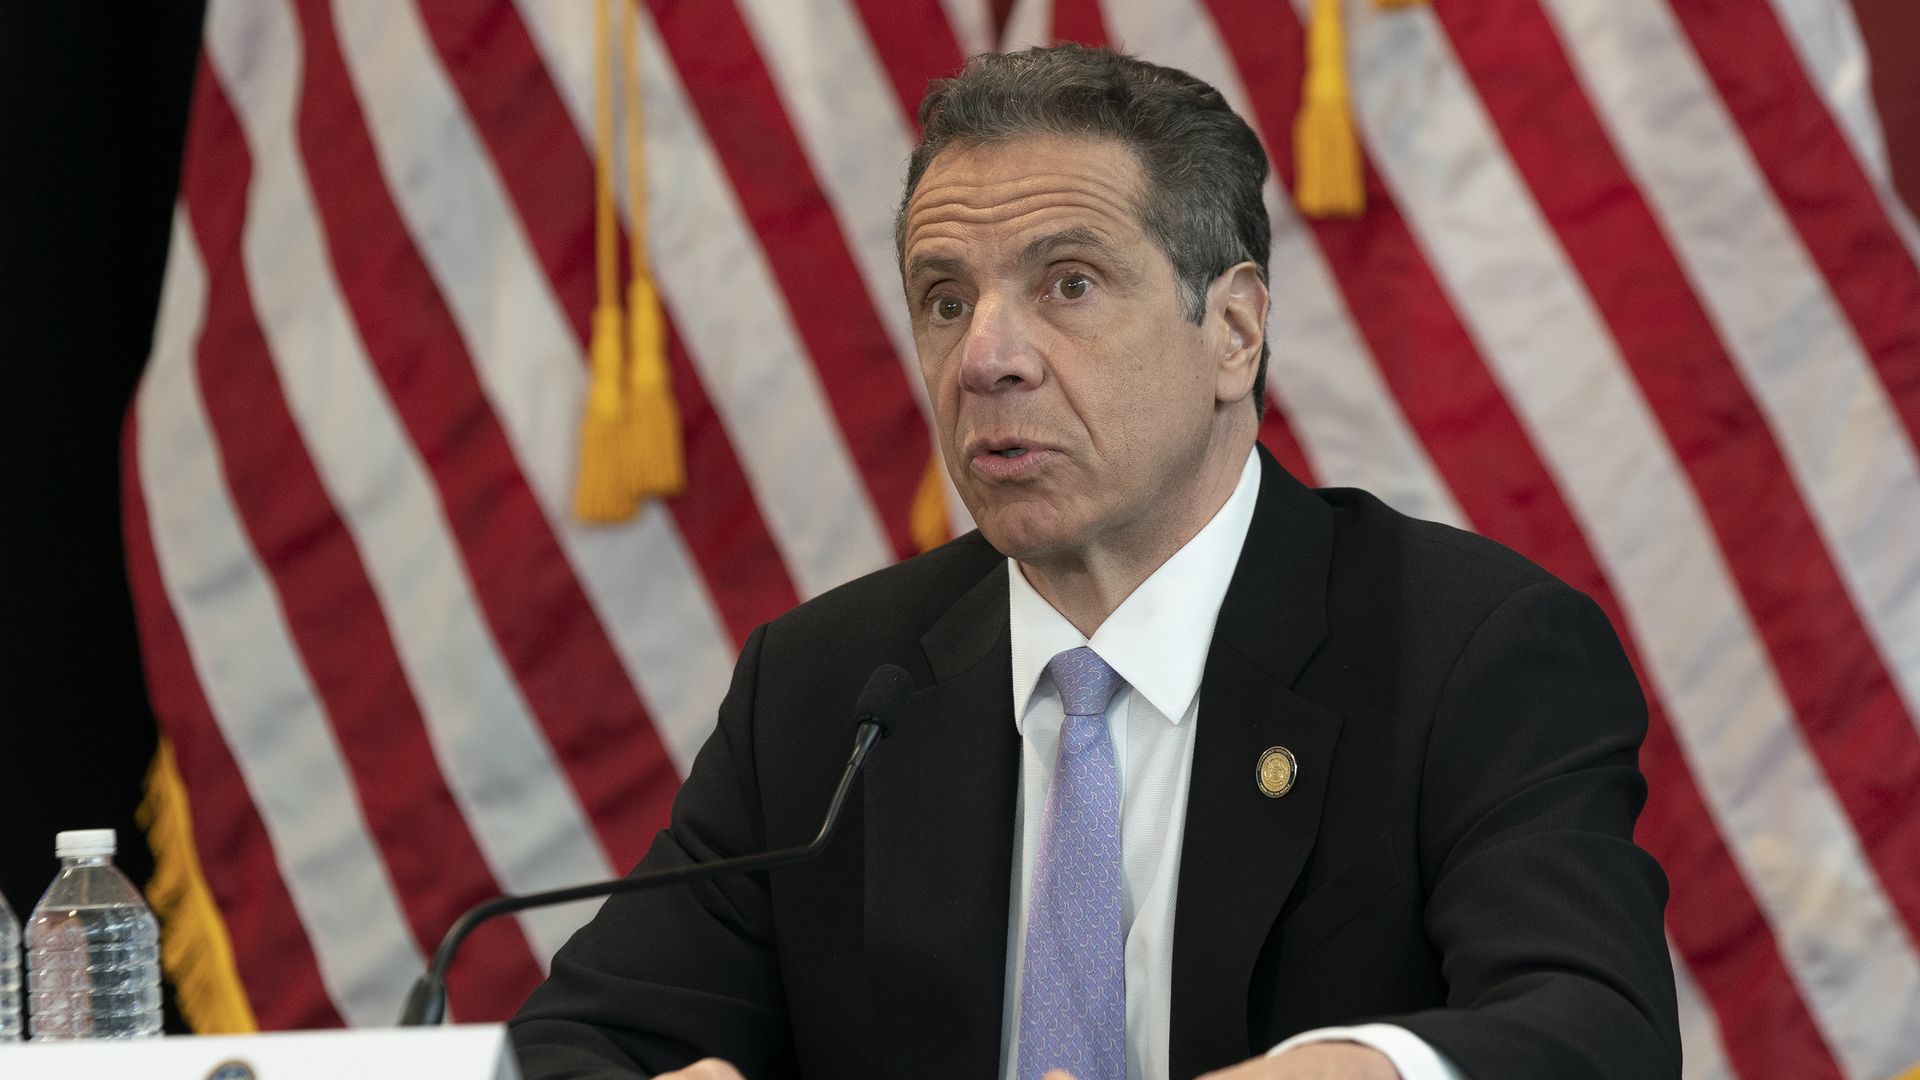 In this image, Andrew Cuomo sits and talks